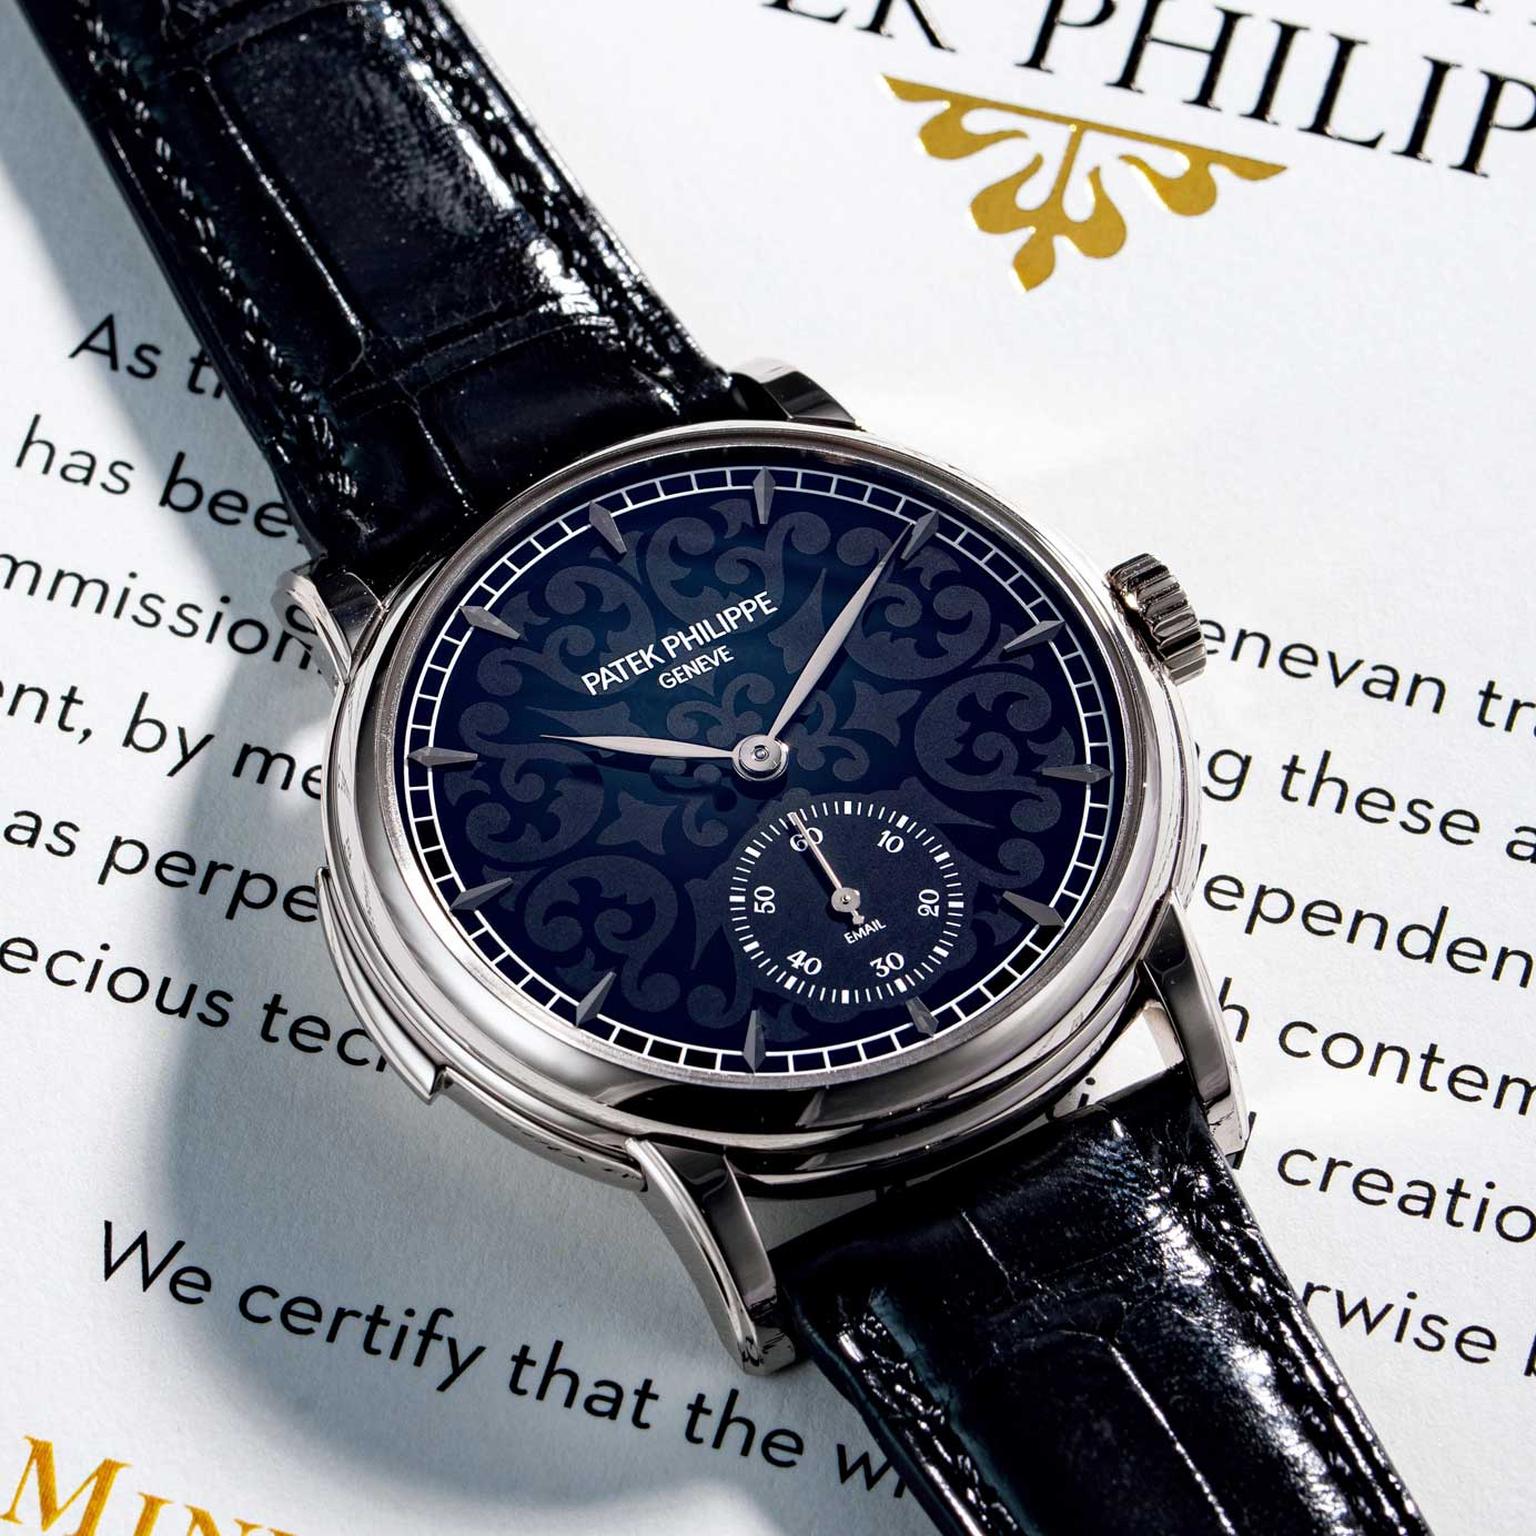 Patek Philippe is a Grand Complication Ref. 5078G